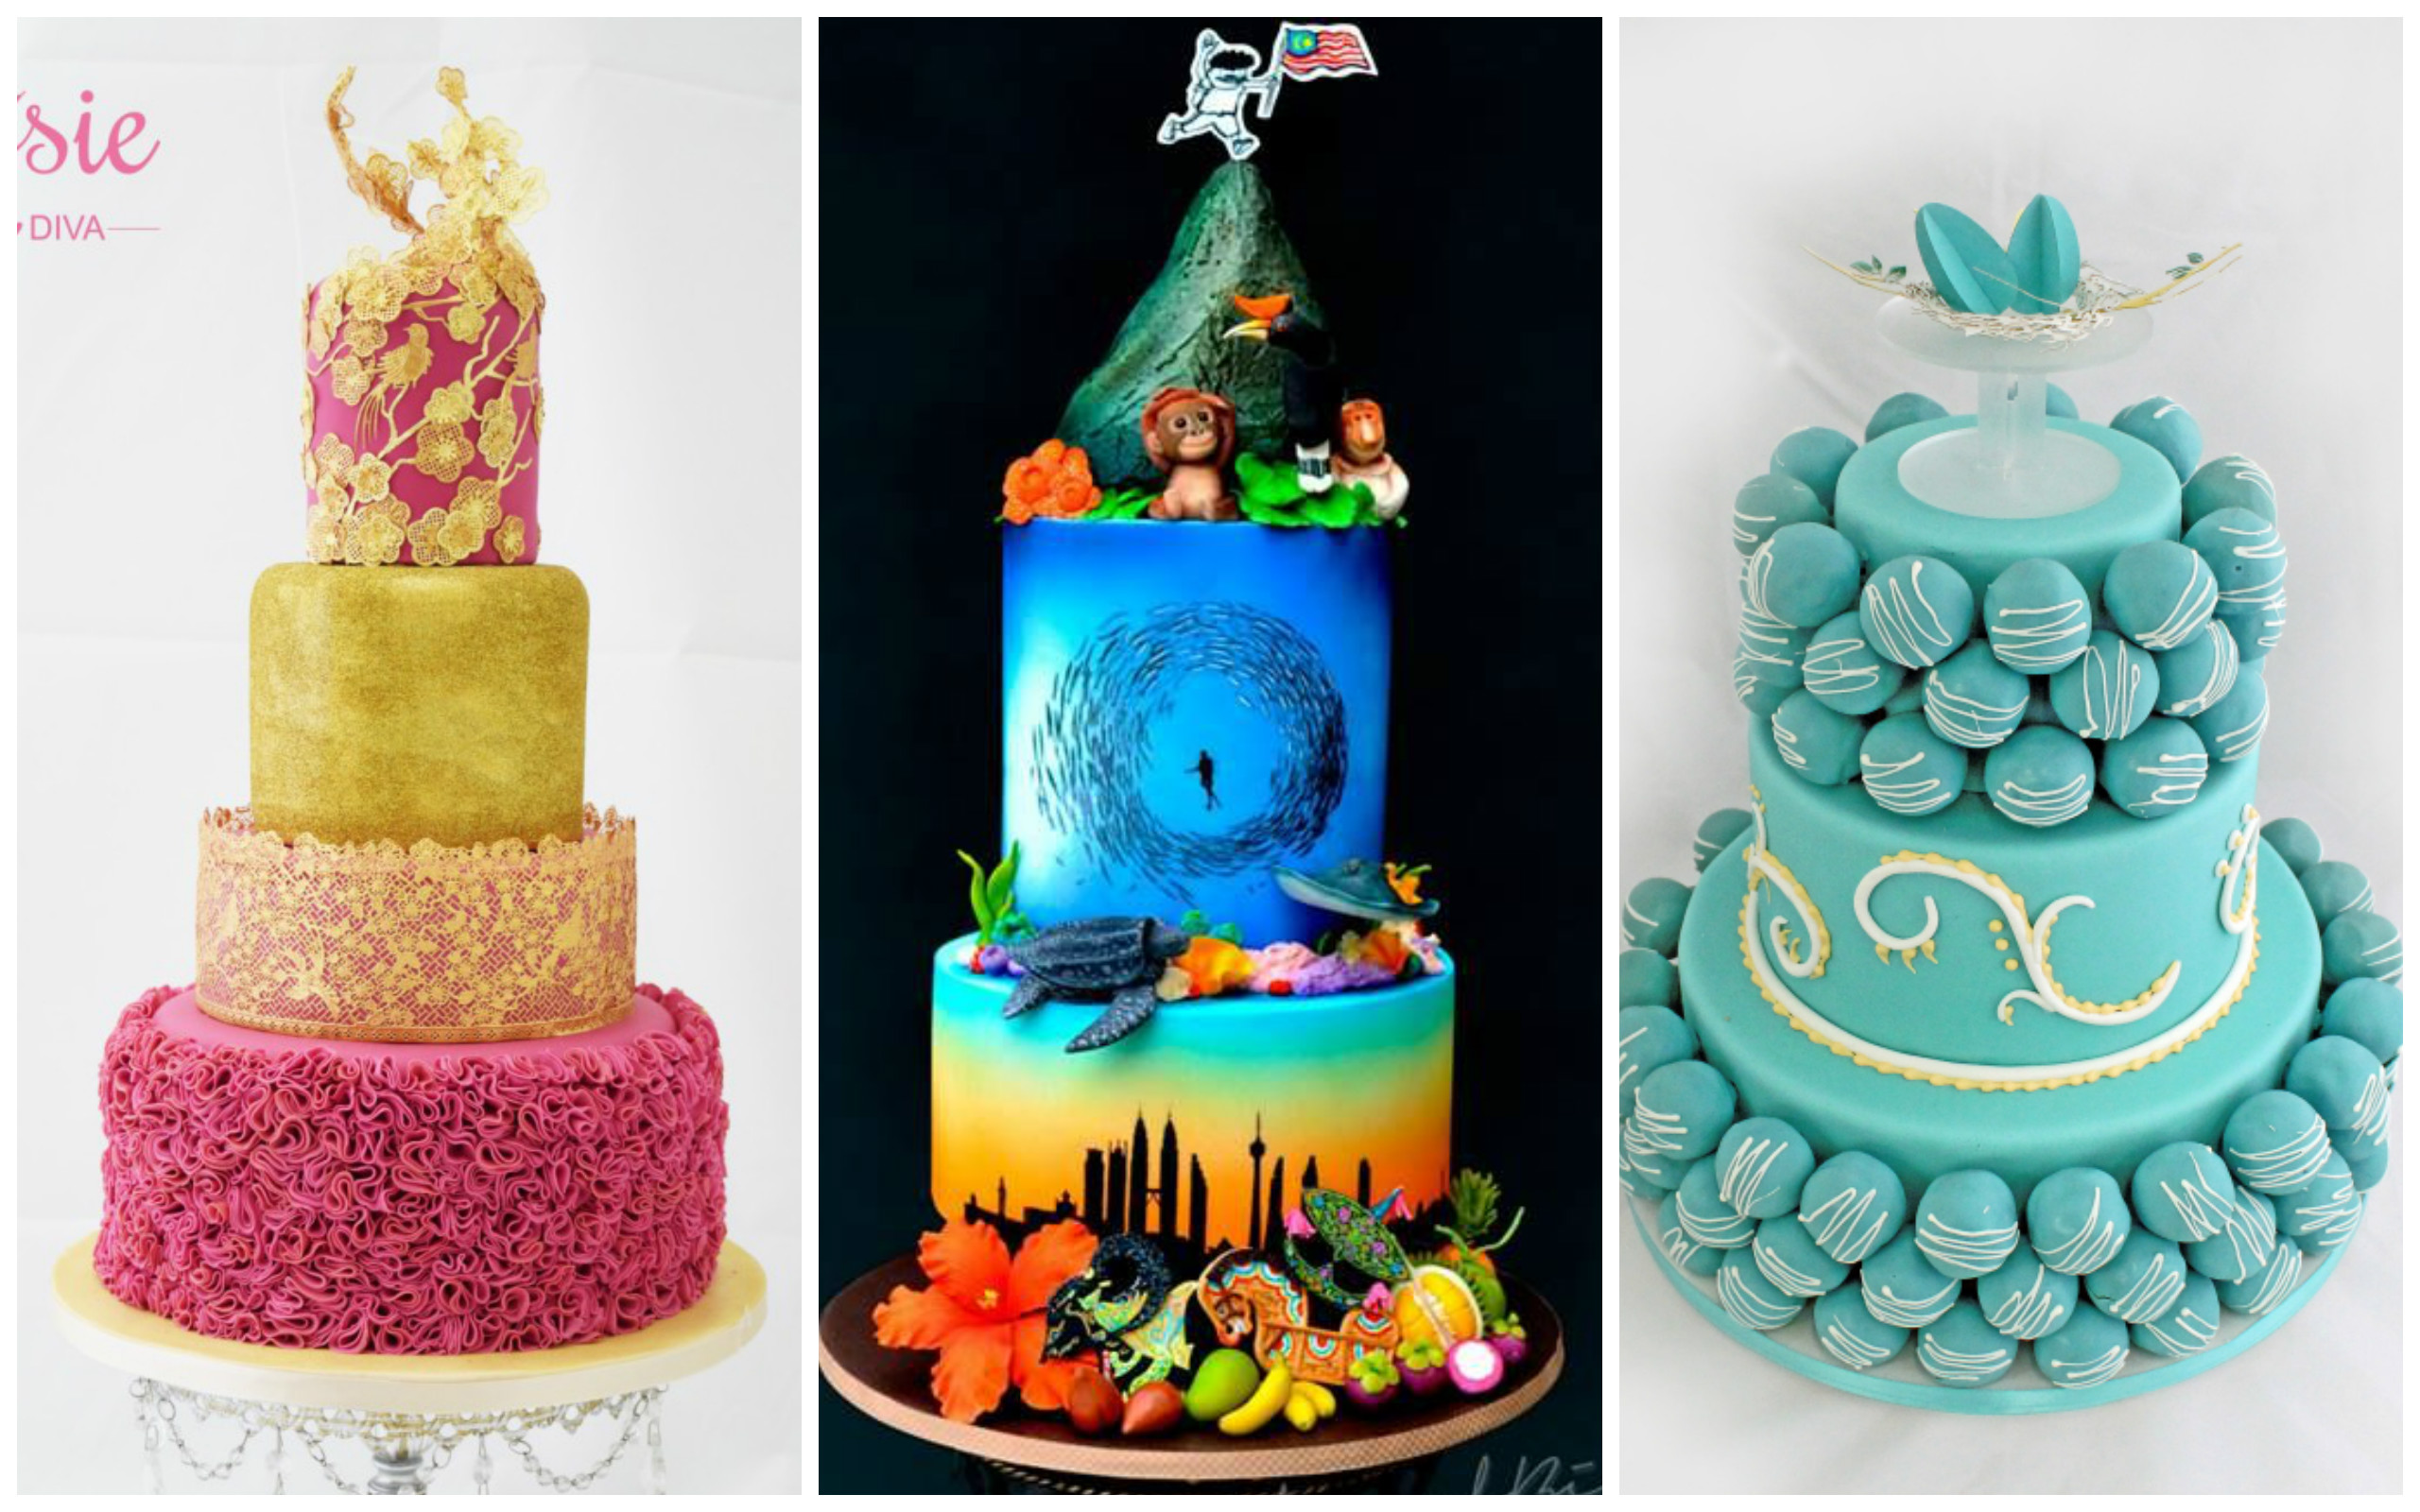 20 Nicest and Coolest  Cakes  Page 14 of 36